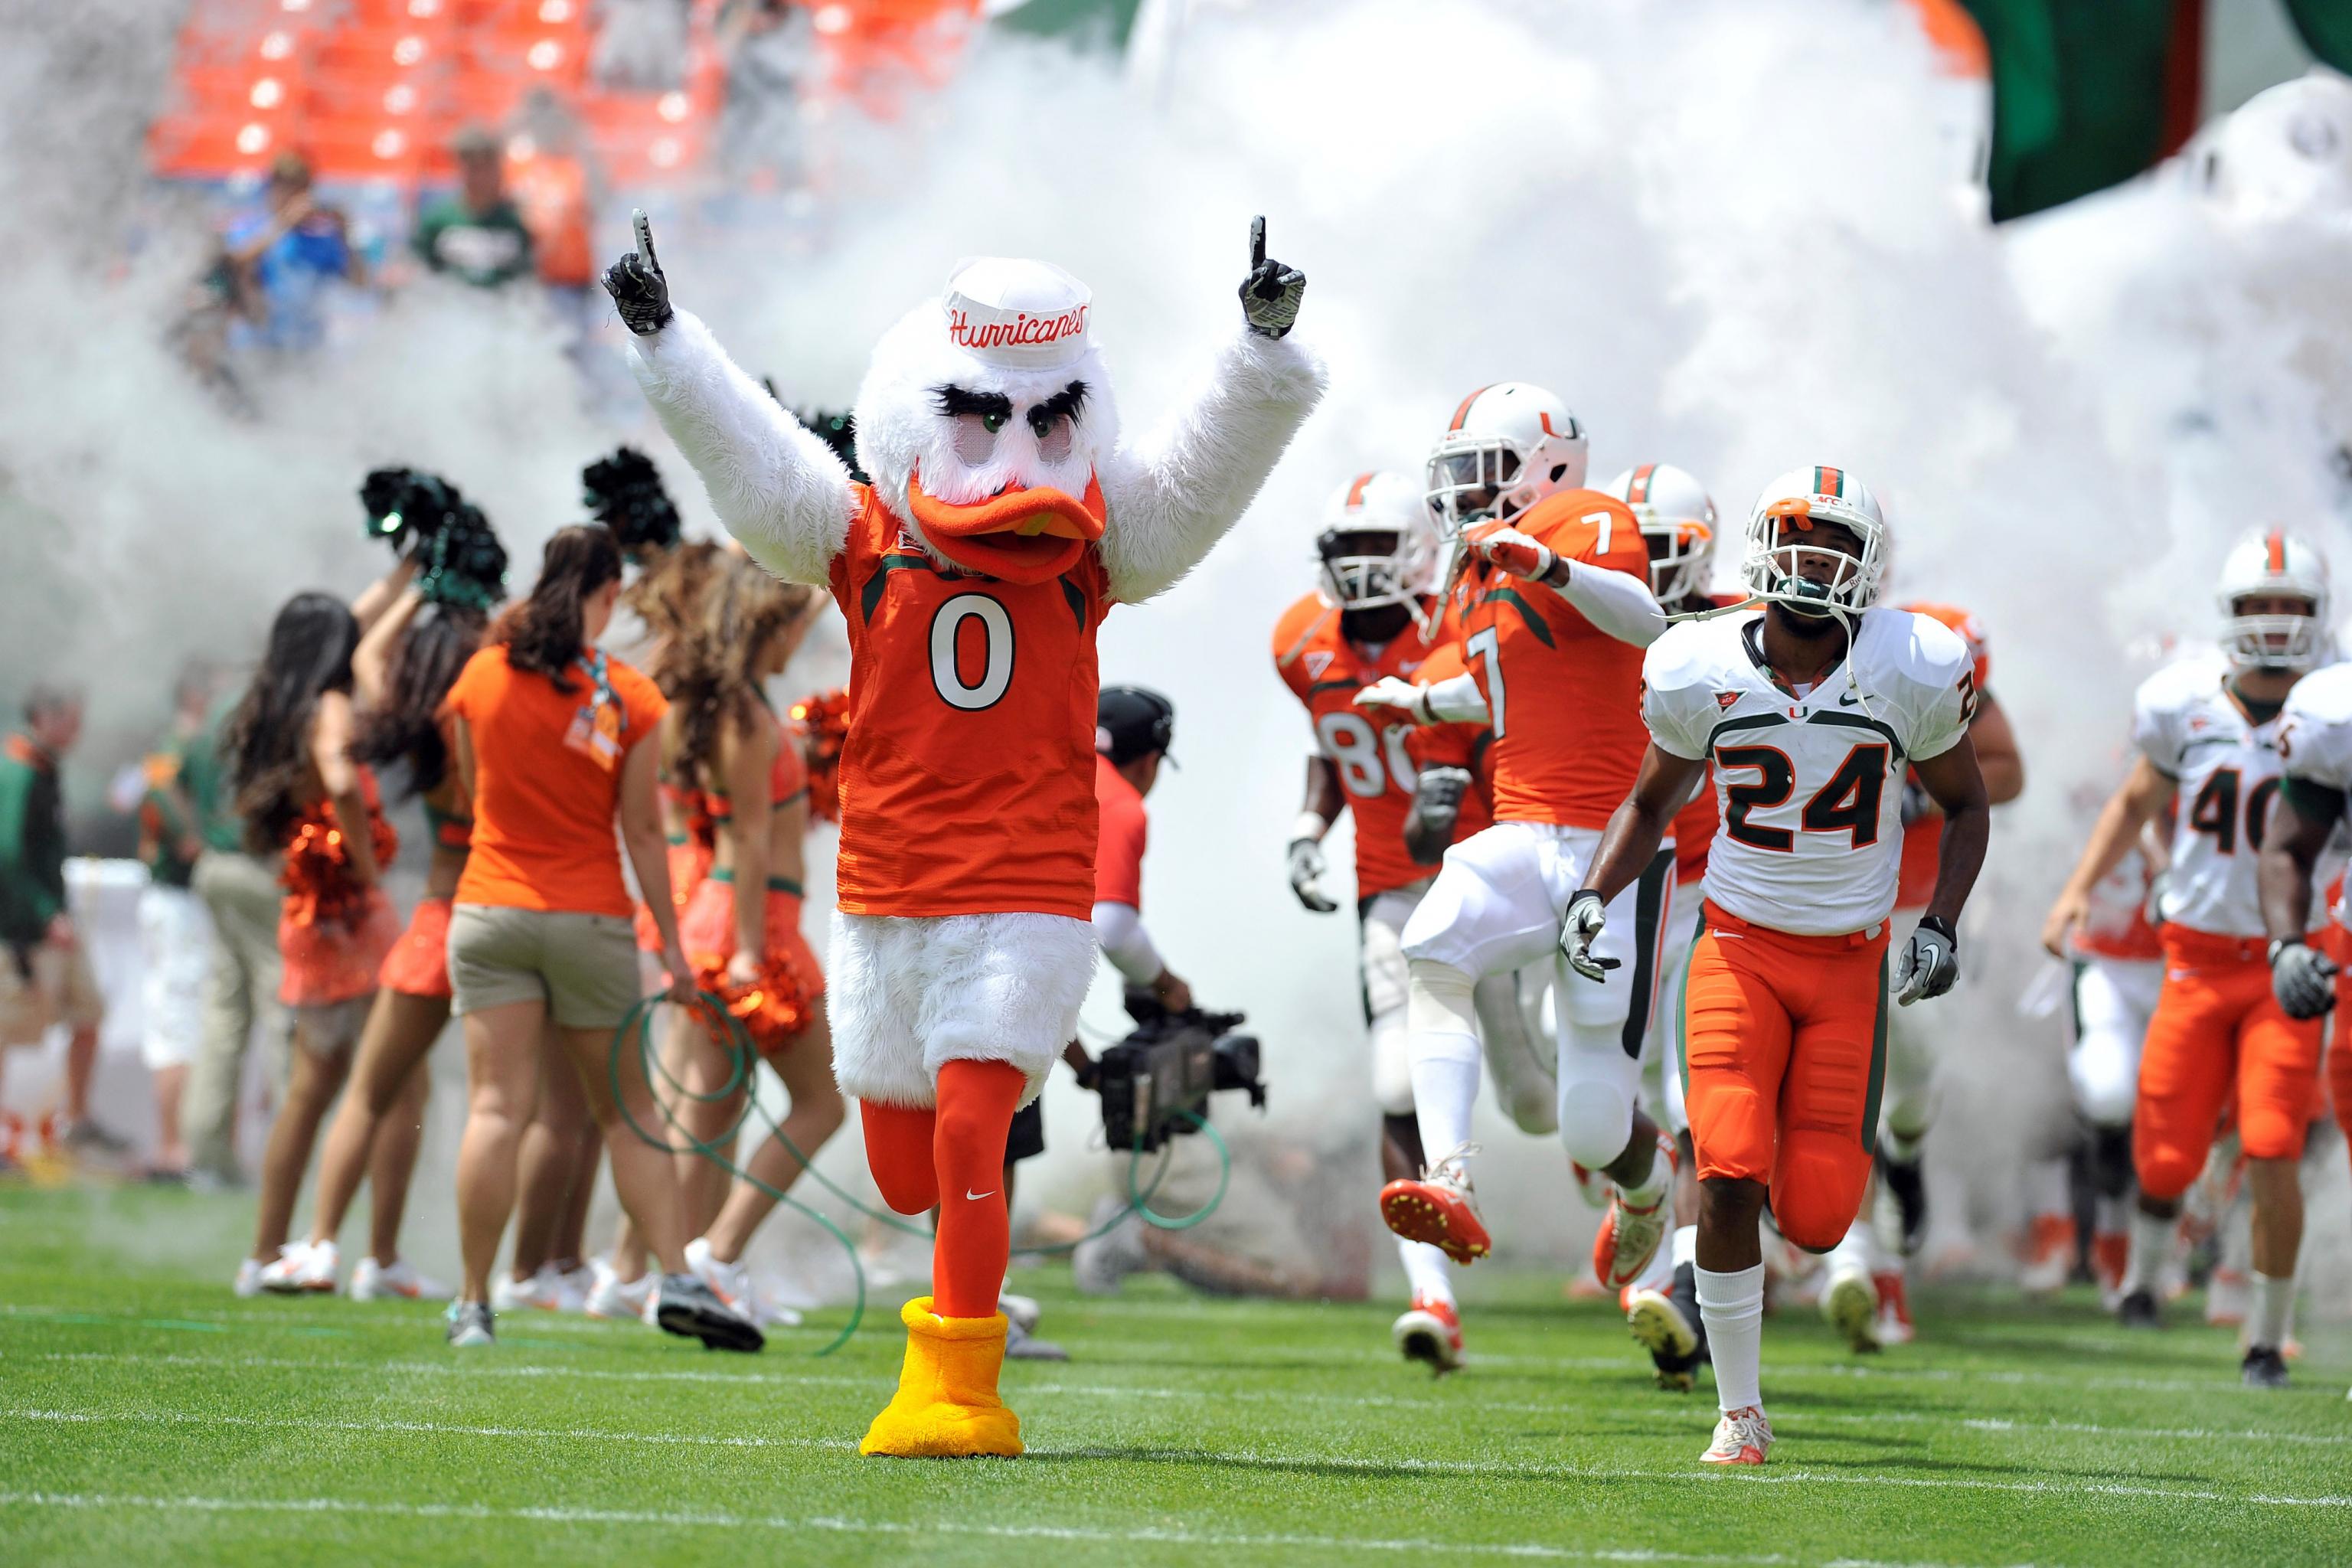 Miami Football Spring Game 2013 Date, Time, Practice Schedule and TV Info